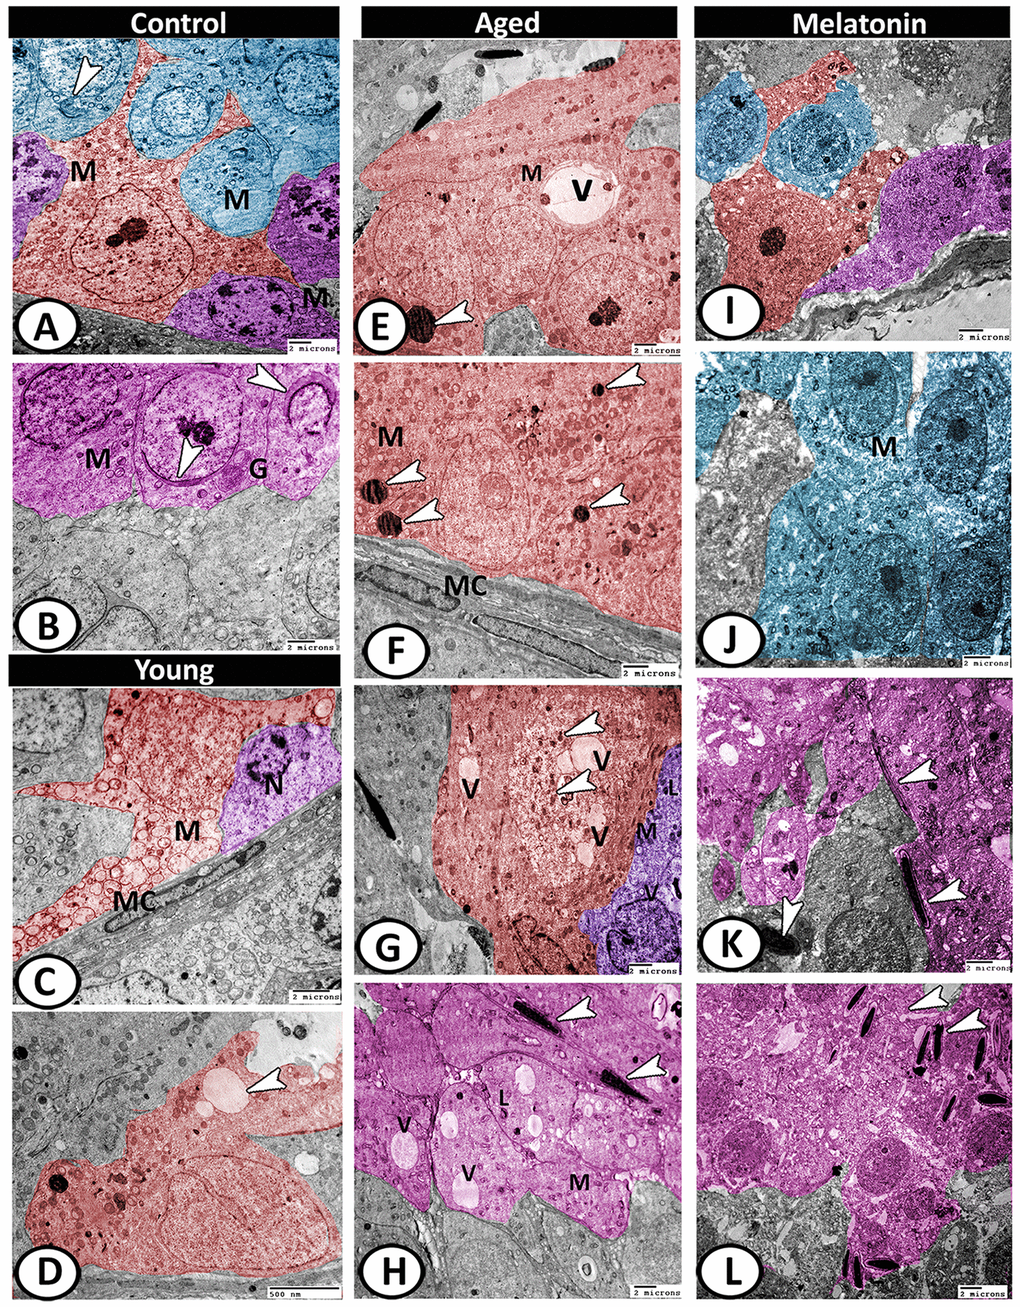 Digitally colored TEM image showing the ultrastructural changes in the seminiferous tubules of young and aged mice. (A) In the control group, the Sertoli cells (red) showed many cell processes and numerous mitochondria (M). Two spermatogonia populations (violet) were characterized by a network arrangement of nuclear chromatin and the cytoplasm contained mitochondria (M). The cytoplasm of primary spermatocytes (blue) was occupied by mitochondria (M)), and Golgi complex (arrowhead). (B) The spermatids (pink) characterized by the formation of an active acrosomal cap (arrowheads), presence of well-developed Golgi apparatus (G) and mitochondria (M). (C, D) In the young mutant mice, the Sertoli cells (red) showed degenerated mitochondria (M) and many vacuoles (arrowhead). The spermatogonia (violet) showed shrunken nuclei (N). Note, presence of myoid cells (MC) surrounding the seminiferous tubules. (E, F) In aged mice, the Sertoli cells' cytoplasm possessed vacuoles (V), mitochondrial metaplasia (M), lysosomes (arrowheads). Note, myoid cell (MC) showed no changes. (G) The cytoplasm of Sertoli cell (red) also contained phagocytosed materials (arrowheads) and vacuoles (V). The spermatogonia (violet) contained few mitochondria (M), vacuoles (V), and lysosomes (L). (H) The spermatids showed presence of many vacuoles (V), lysosomes (L), and the mitochondria (M) showed loss of their cristae. Many end pieces of degenerated sperms (arrowheads) could be demonstrated. (I) In melatonin group, the seminiferous tubules showed normal Sertoli cell (red), spermatogonia (violet) and spermatocytes (blue). (J) The spermatocytes (blue) contained numerous mitochondria (M) with some small vacuoles. (K, L) The differentiation of spermatids (pink) to normal sperms (arrowheads) was evident in melatonin group.